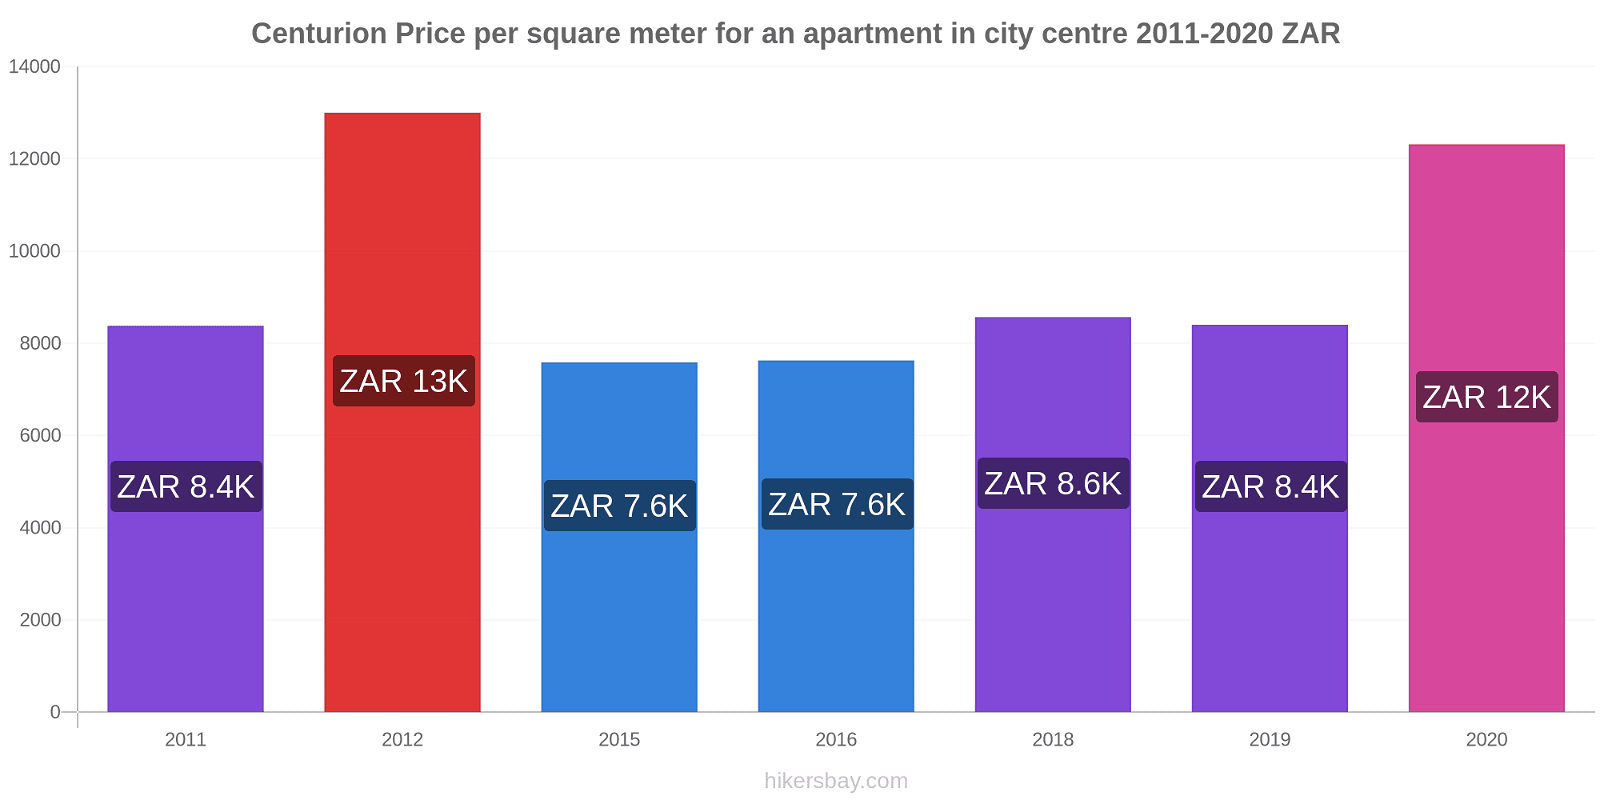 Centurion price changes Price per square meter for an apartment in city centre hikersbay.com